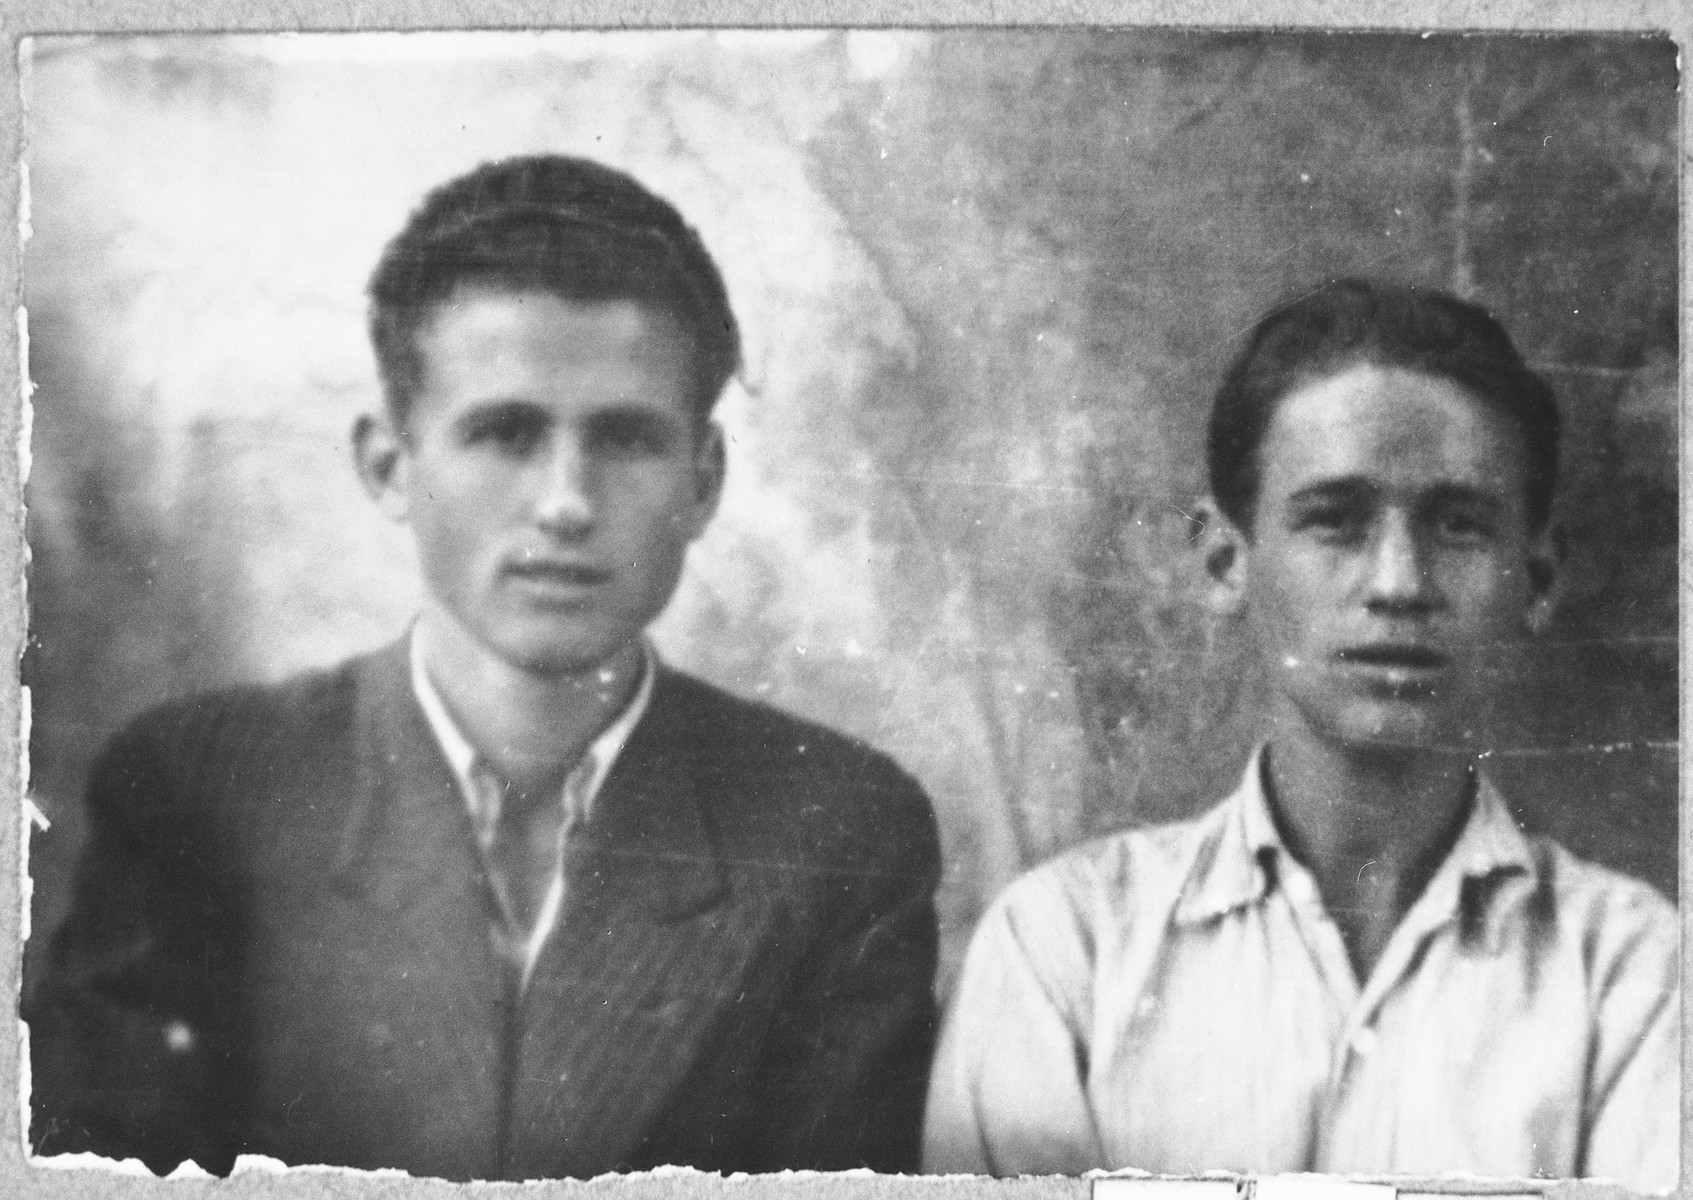 Portrait of Rachamin and Baruch Koen, sons of Eliau Koen.  Rachamin was a laborer and Baruch, a student.  They lived at Avliya 4 in Bitola.